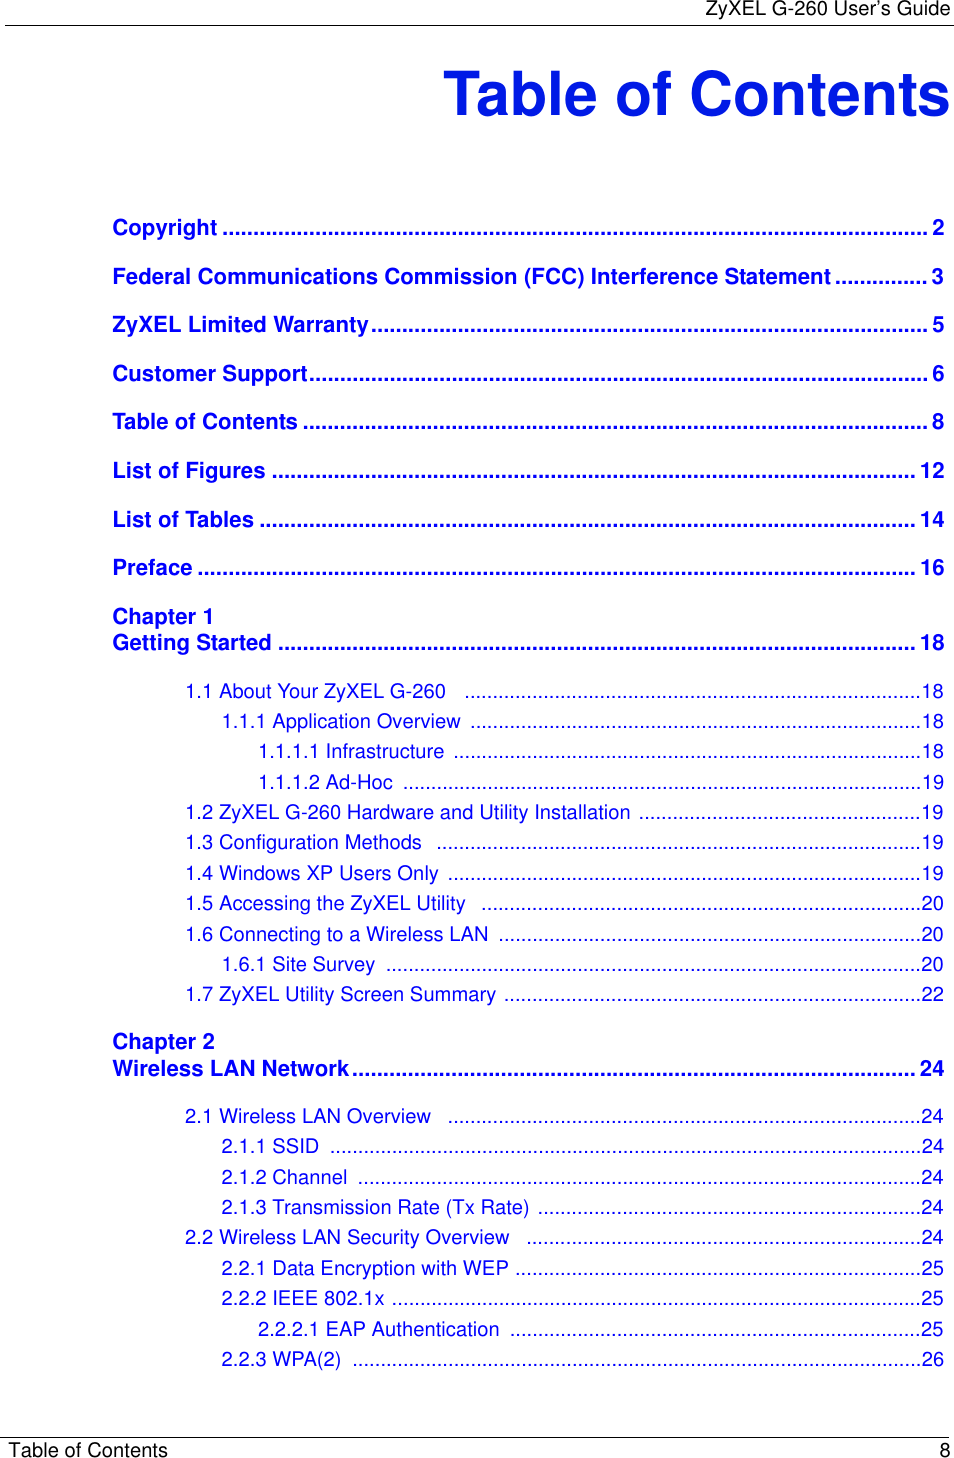 ZyXEL G-260 User’s GuideTable of Contents 8Table of ContentsCopyright .................................................................................................................. 2Federal Communications Commission (FCC) Interference Statement ............... 3ZyXEL Limited Warranty.......................................................................................... 5Customer Support.................................................................................................... 6Table of Contents ..................................................................................................... 8List of Figures ........................................................................................................ 12List of Tables .......................................................................................................... 14Preface .................................................................................................................... 16Chapter 1Getting Started ....................................................................................................... 181.1 About Your ZyXEL G-260   .................................................................................181.1.1 Application Overview  ................................................................................181.1.1.1 Infrastructure  ...................................................................................181.1.1.2 Ad-Hoc  ............................................................................................191.2 ZyXEL G-260 Hardware and Utility Installation ..................................................191.3 Configuration Methods  ......................................................................................191.4 Windows XP Users Only ....................................................................................191.5 Accessing the ZyXEL Utility   ..............................................................................201.6 Connecting to a Wireless LAN  ...........................................................................201.6.1 Site Survey  ...............................................................................................201.7 ZyXEL Utility Screen Summary ..........................................................................22Chapter 2Wireless LAN Network........................................................................................... 242.1 Wireless LAN Overview   ....................................................................................242.1.1 SSID  .........................................................................................................242.1.2 Channel  ....................................................................................................242.1.3 Transmission Rate (Tx Rate) ....................................................................242.2 Wireless LAN Security Overview   ......................................................................242.2.1 Data Encryption with WEP ........................................................................252.2.2 IEEE 802.1x ..............................................................................................252.2.2.1 EAP Authentication  .........................................................................252.2.3 WPA(2)  .....................................................................................................26